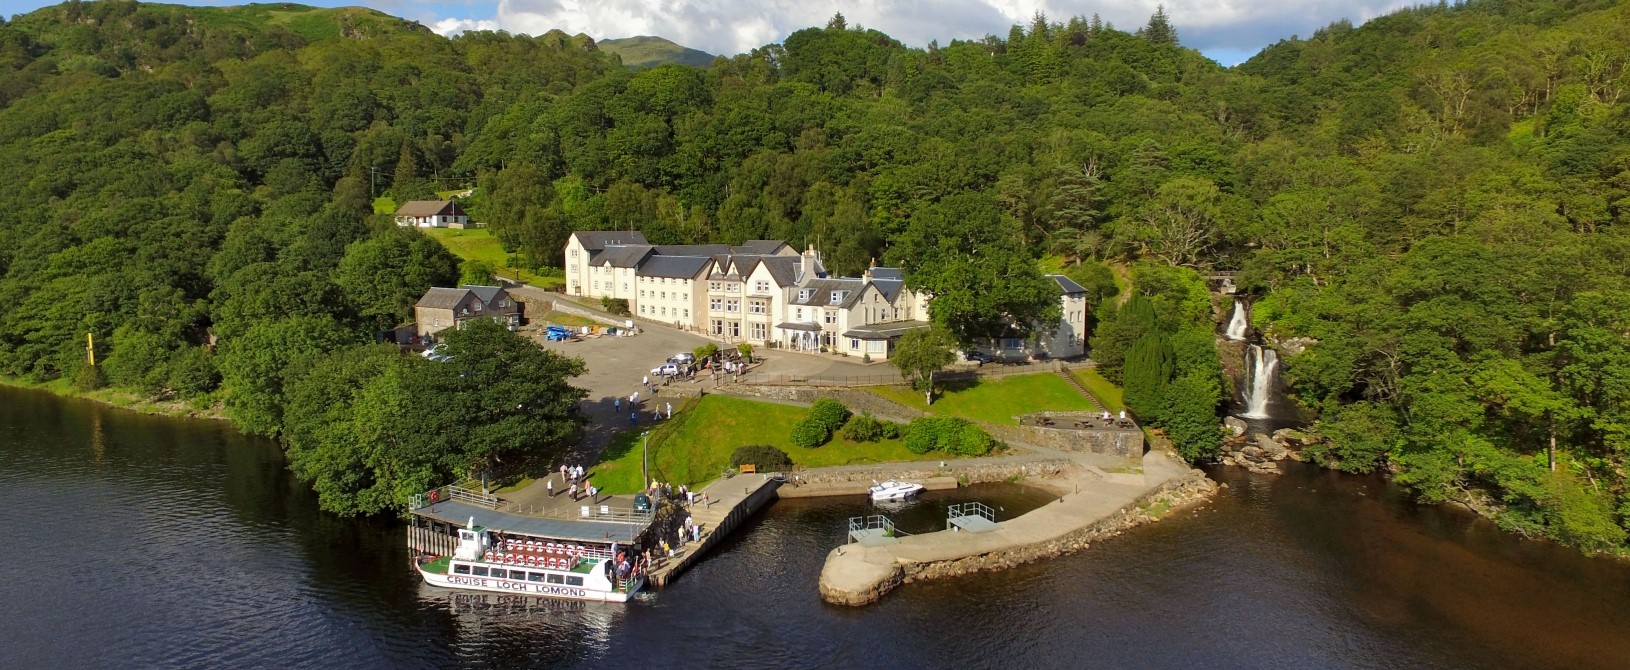 A picture perfect for a postcard of The Inversnaid hotel